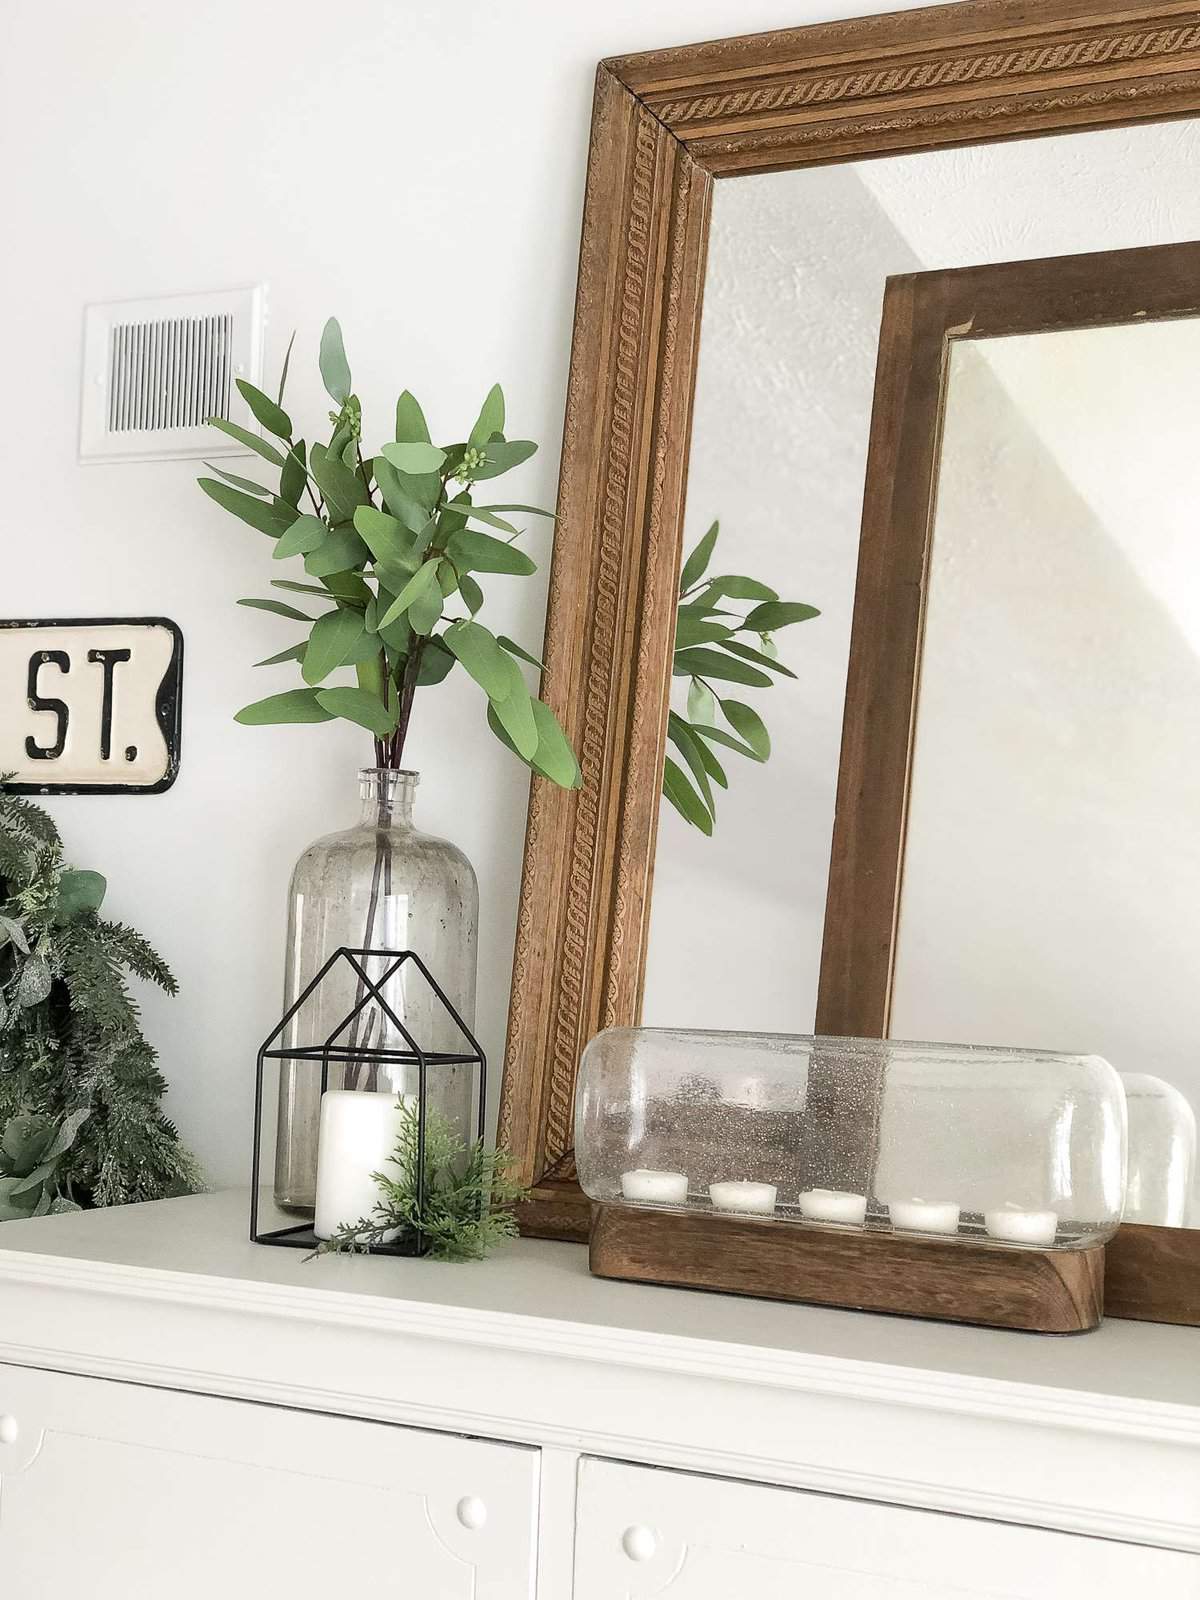 Do you love the look of terrariums? Try out this simple DIY faux terrarium! Brighten your home in less than 10 minutes with this easy tutorial. #fromhousetohaven #diyterrarium #fauxterrarium #plants